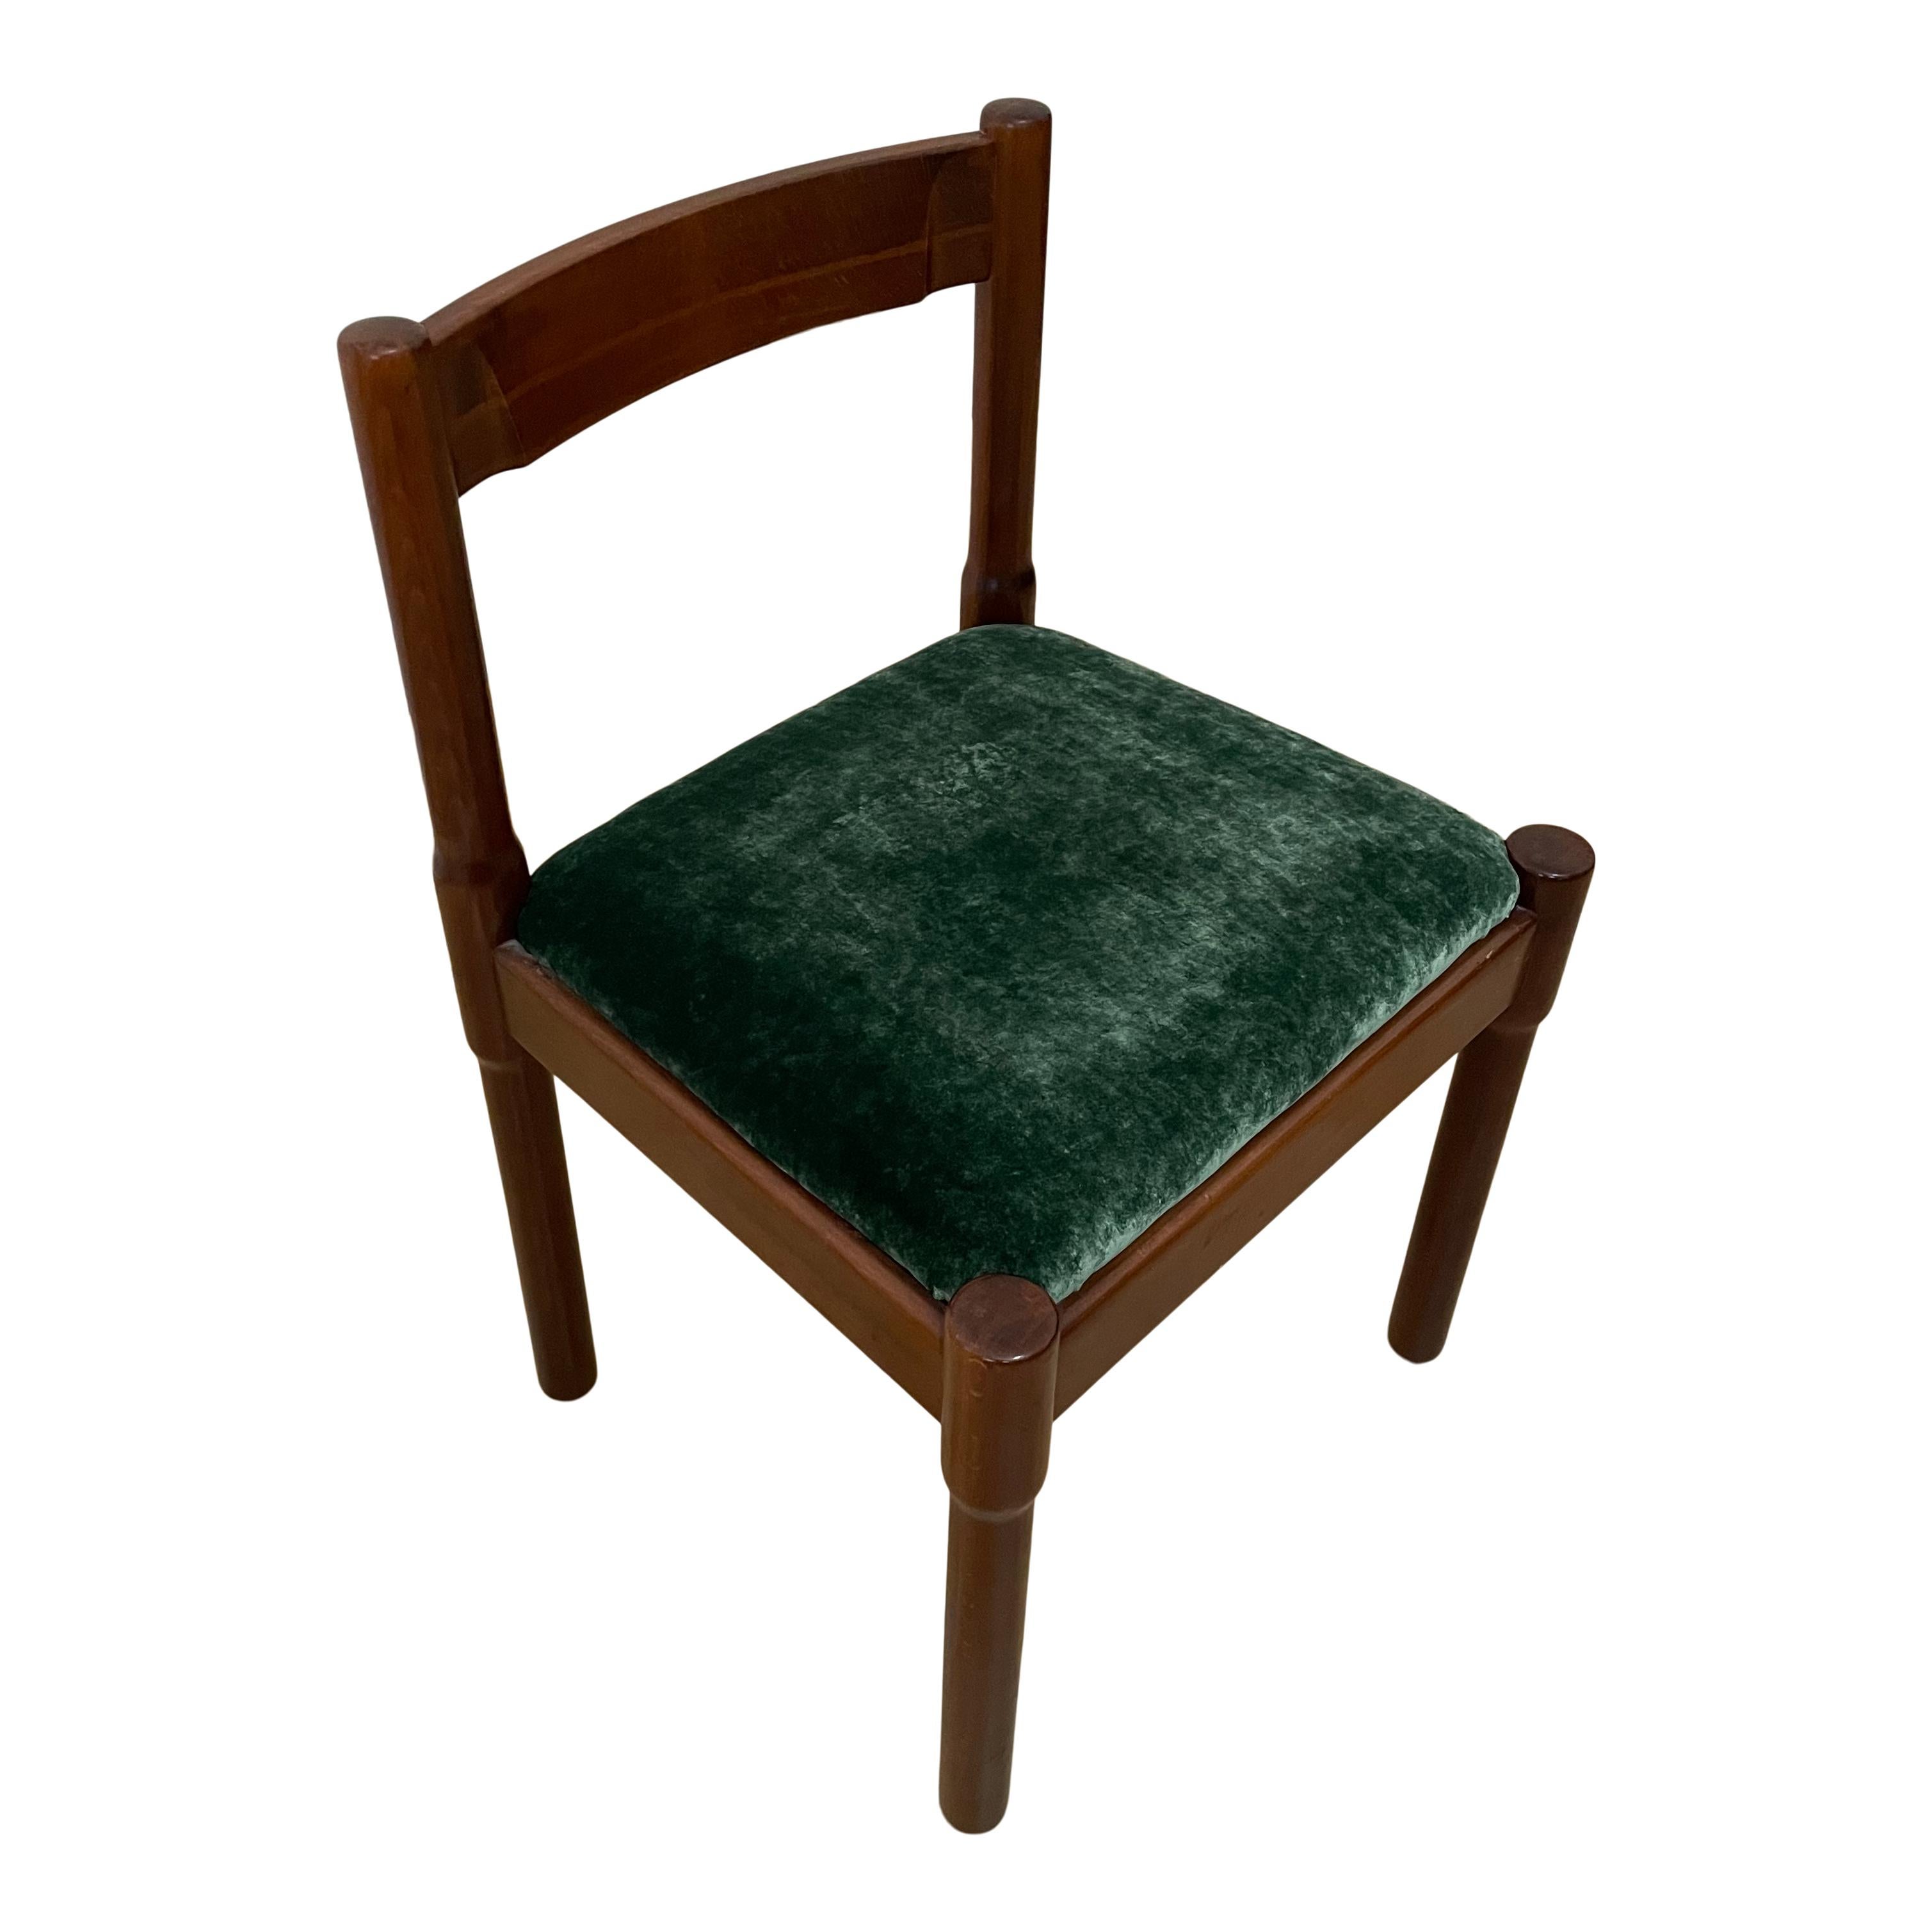 Velvet Vico Magistretti Midcentury “Carimate” Dining Chair for Cassina, 1963, Set of 4 For Sale